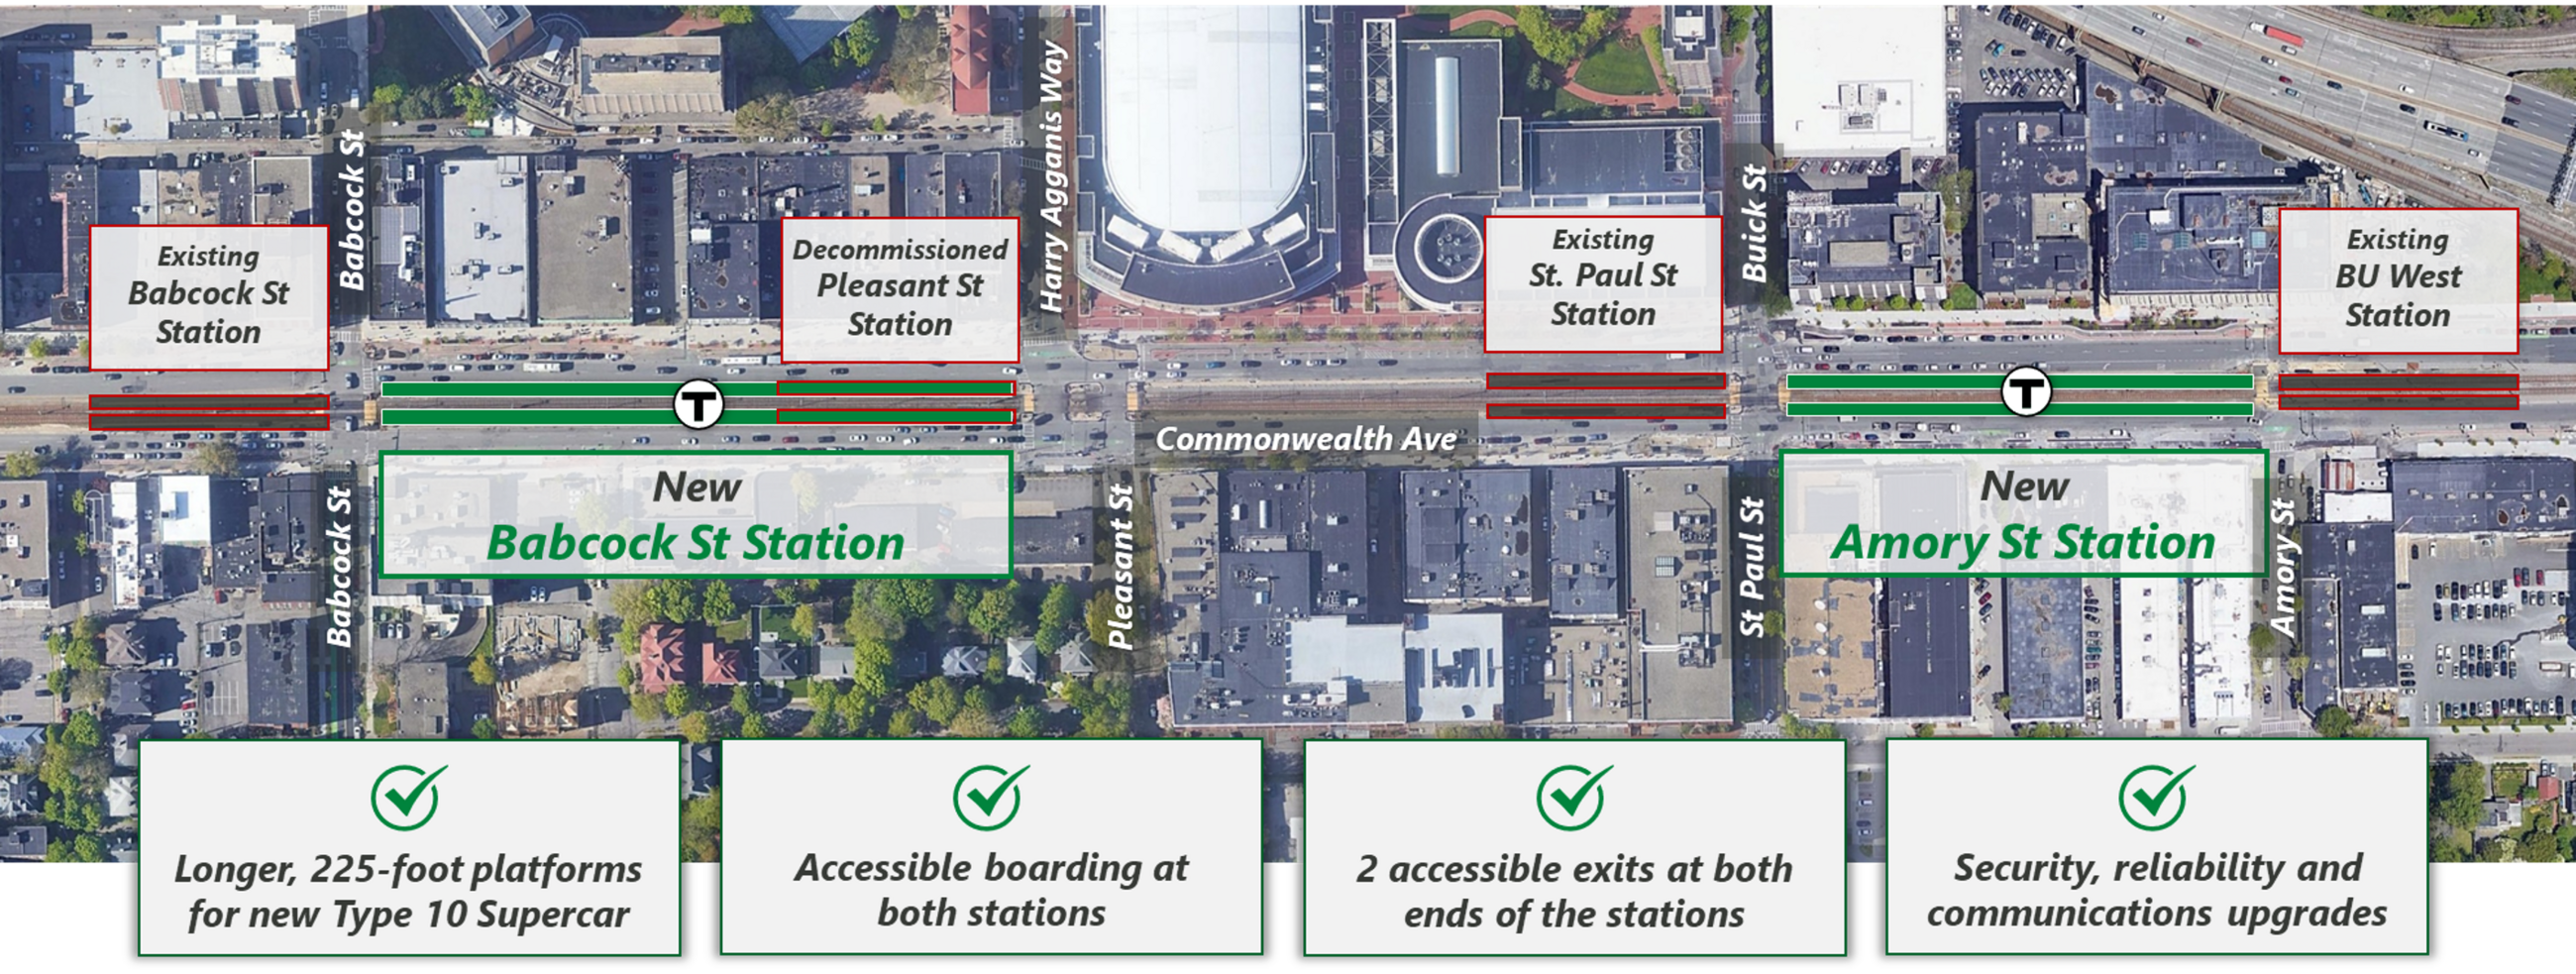 The new Green Line B Branch stations at Babcock Street and Amory Street include longer, 225-foot platforms, accessible boarding, two accessible exits at both ends of the stations, and upgrades to security, reliability, and communications.